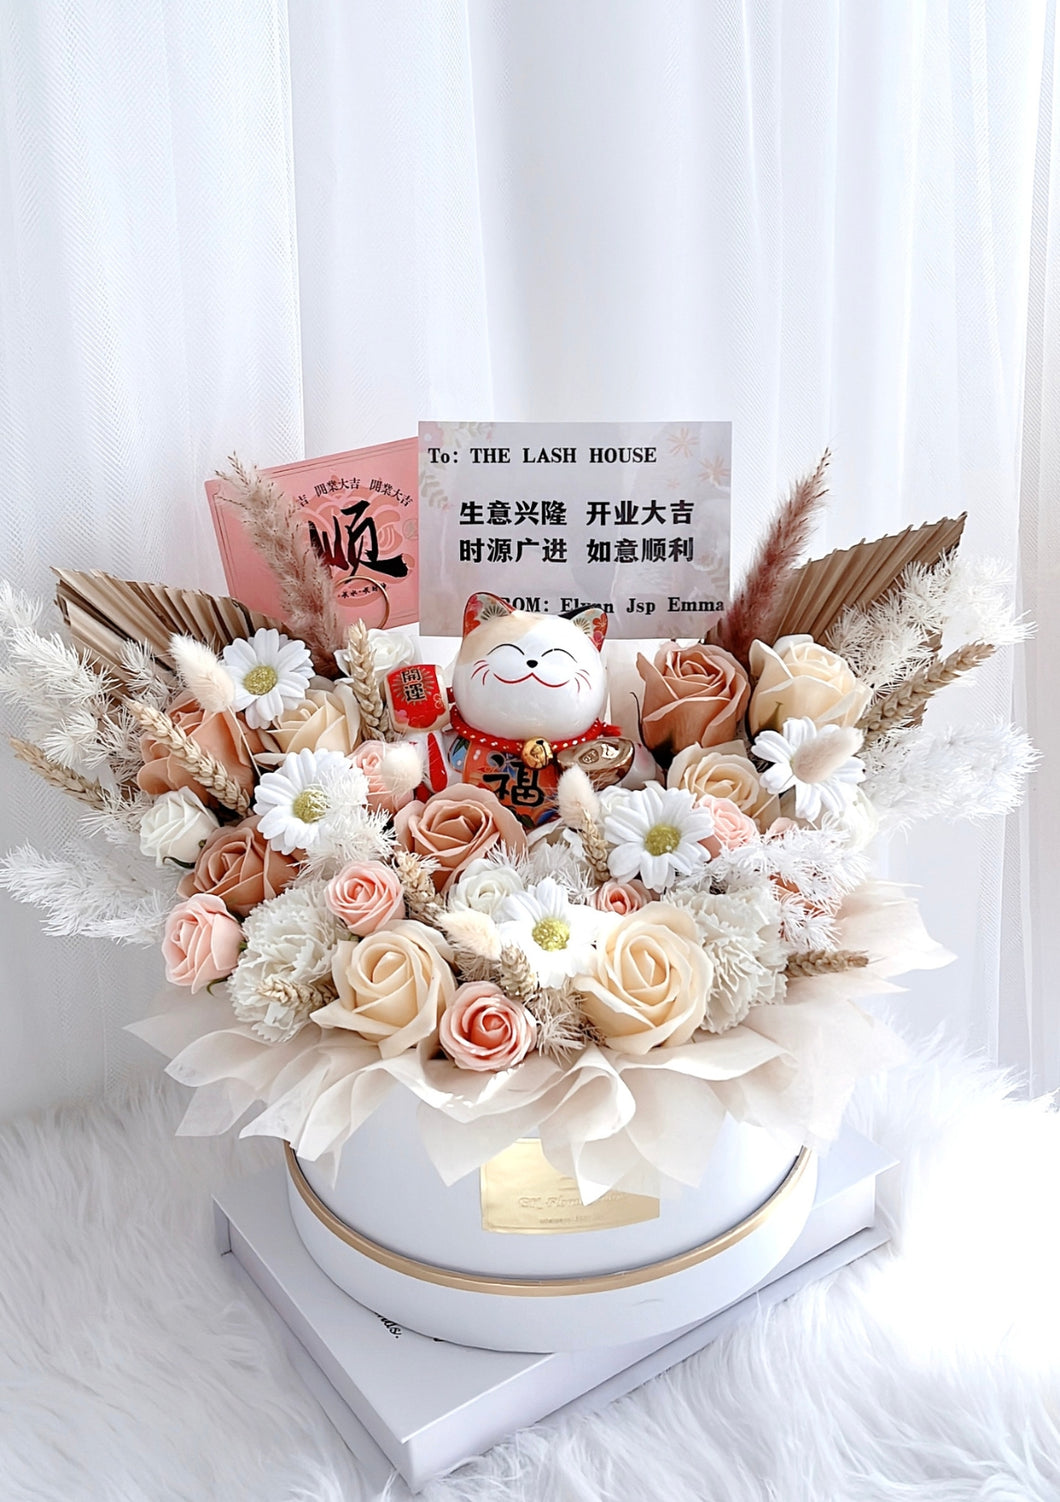 Warm Tropical Golden with Soap Flower Bucket with Fortune Cat 暖色系开运黄金招财猫开业香皂花花盒